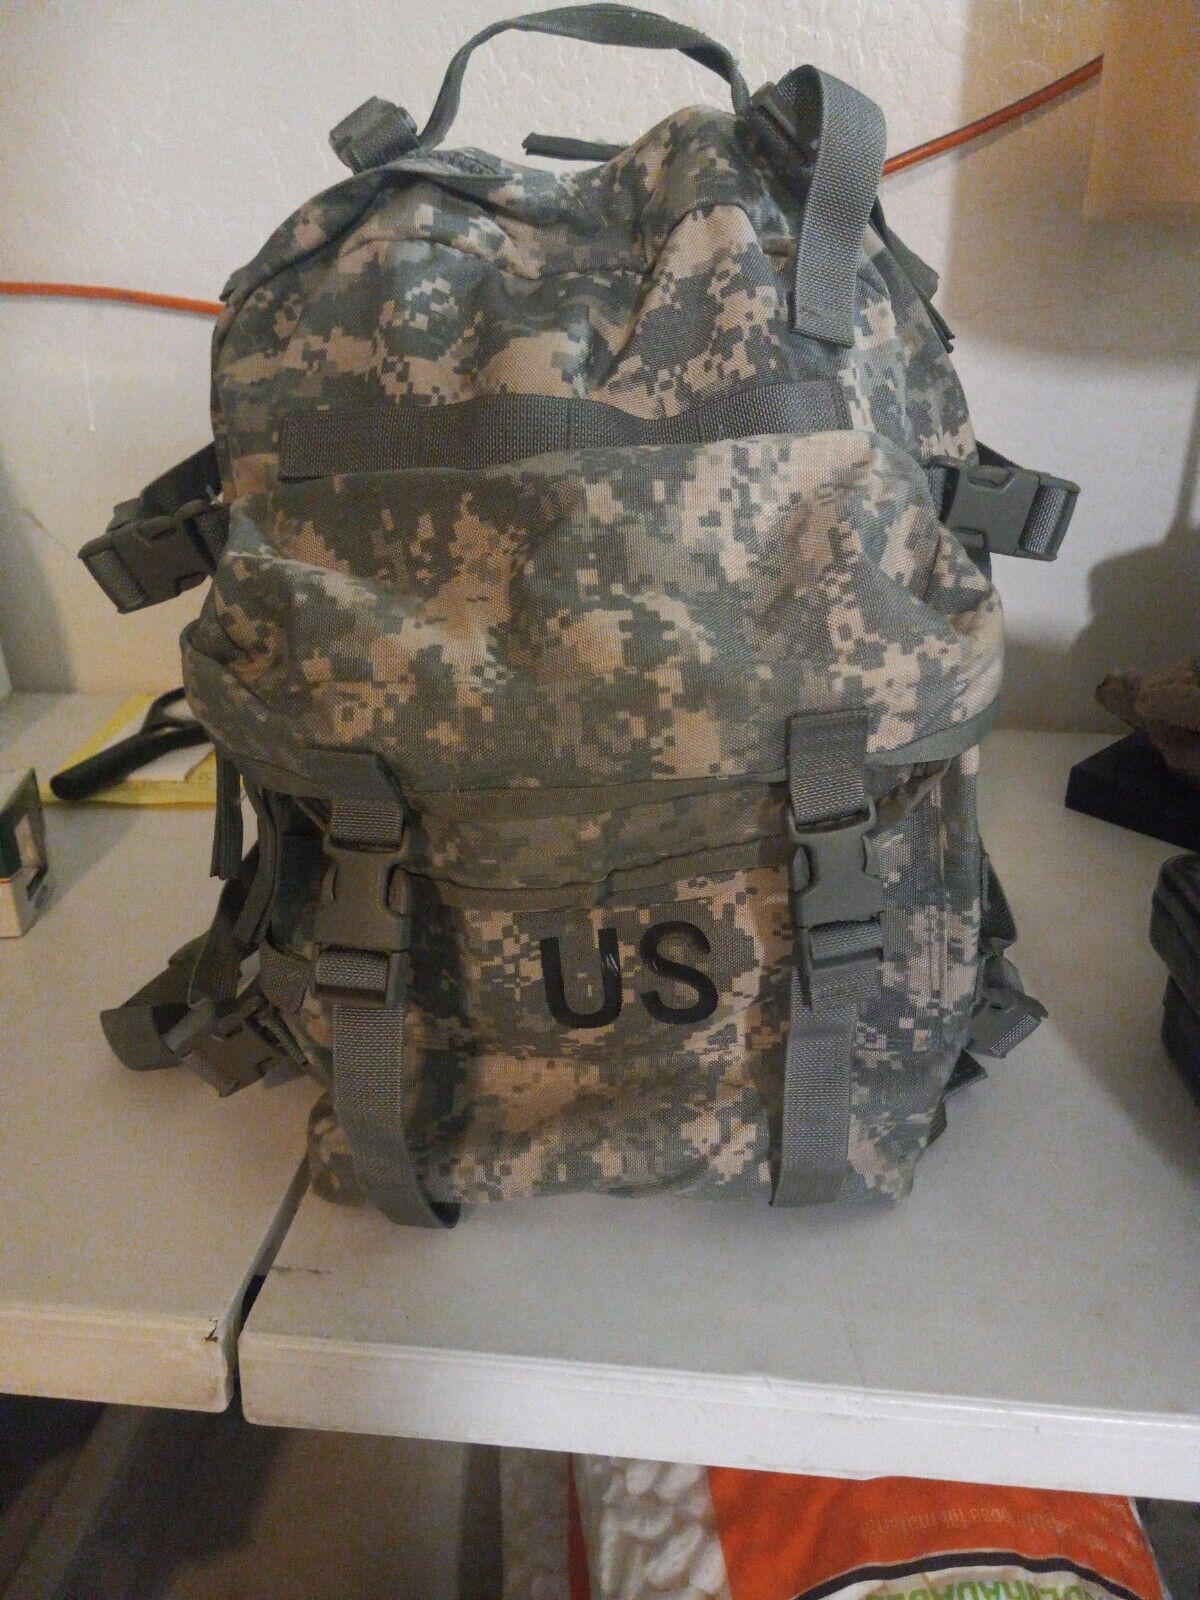 US ARMY SURPLUS ACU ASSAULT PACK 30L 3 DAY MOLLE II BACKPACK .